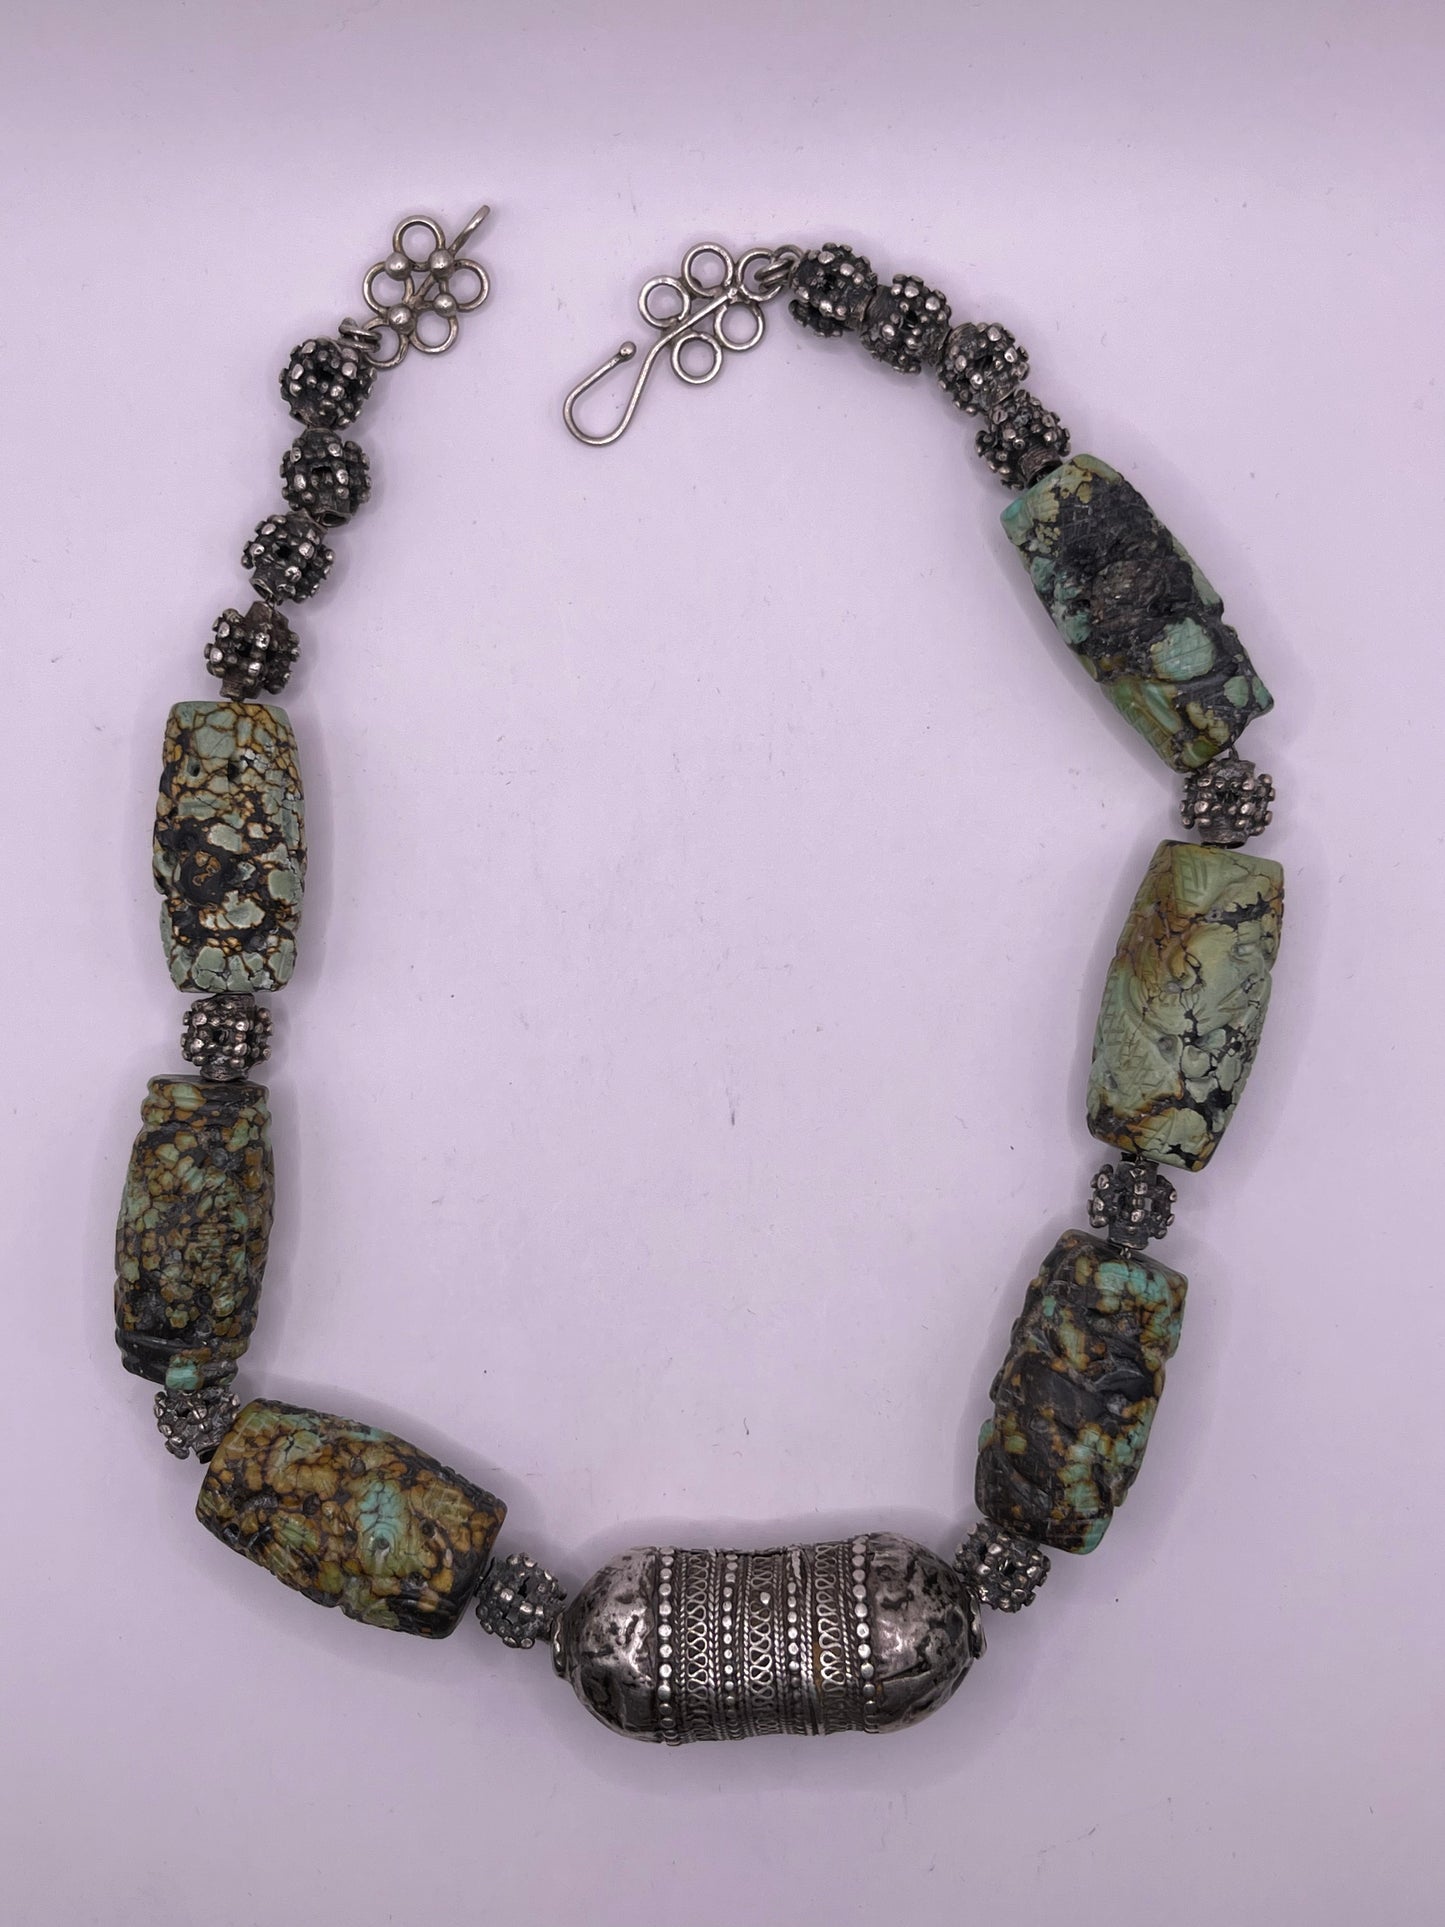 Vintage necklace with carved turquoise beads and antique silver beads